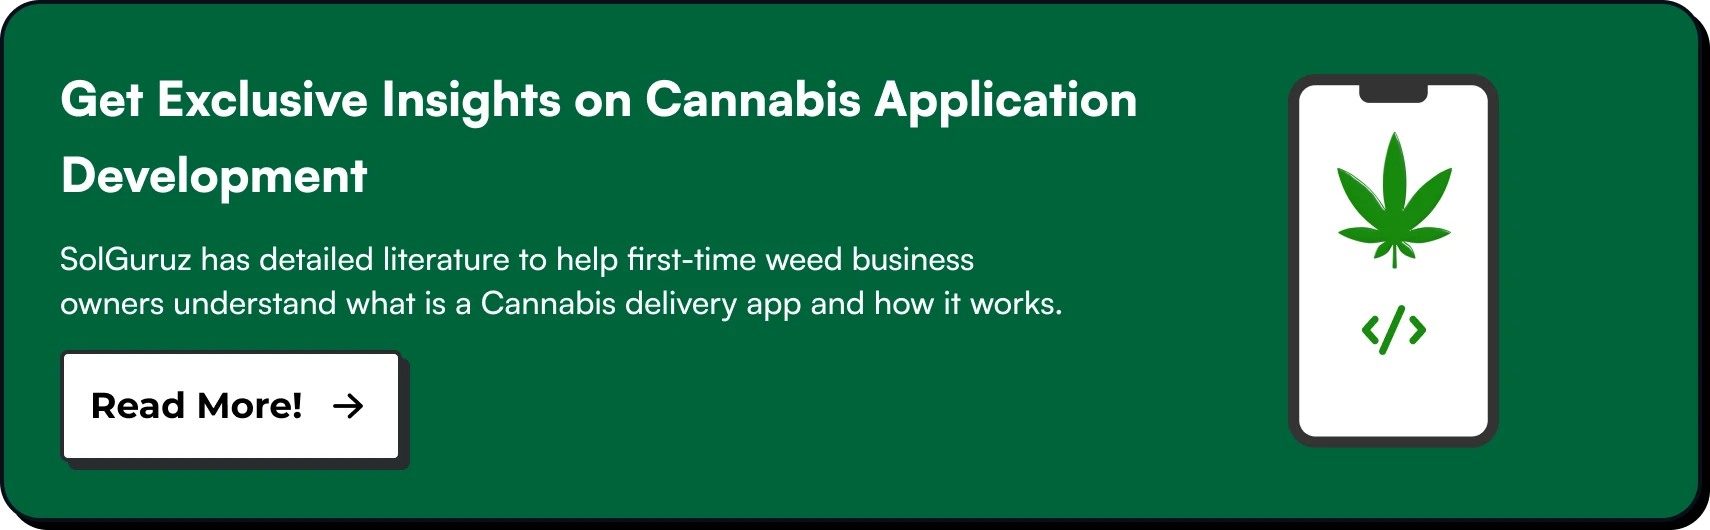 Get Exclusive Insights on Cannabis Application Development